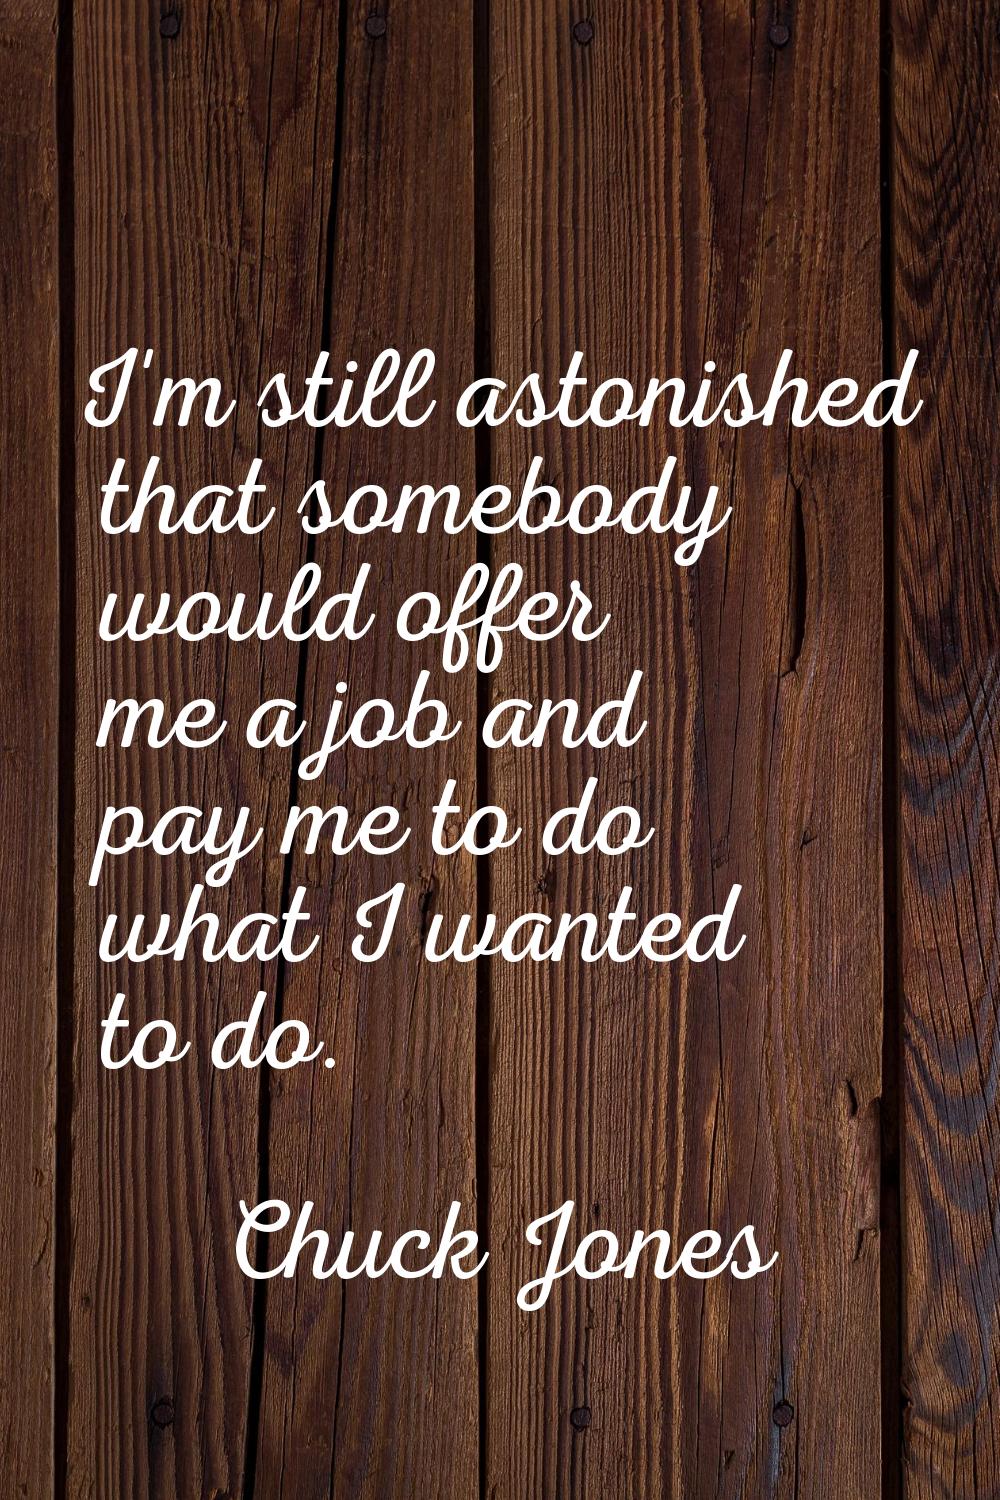 I'm still astonished that somebody would offer me a job and pay me to do what I wanted to do.